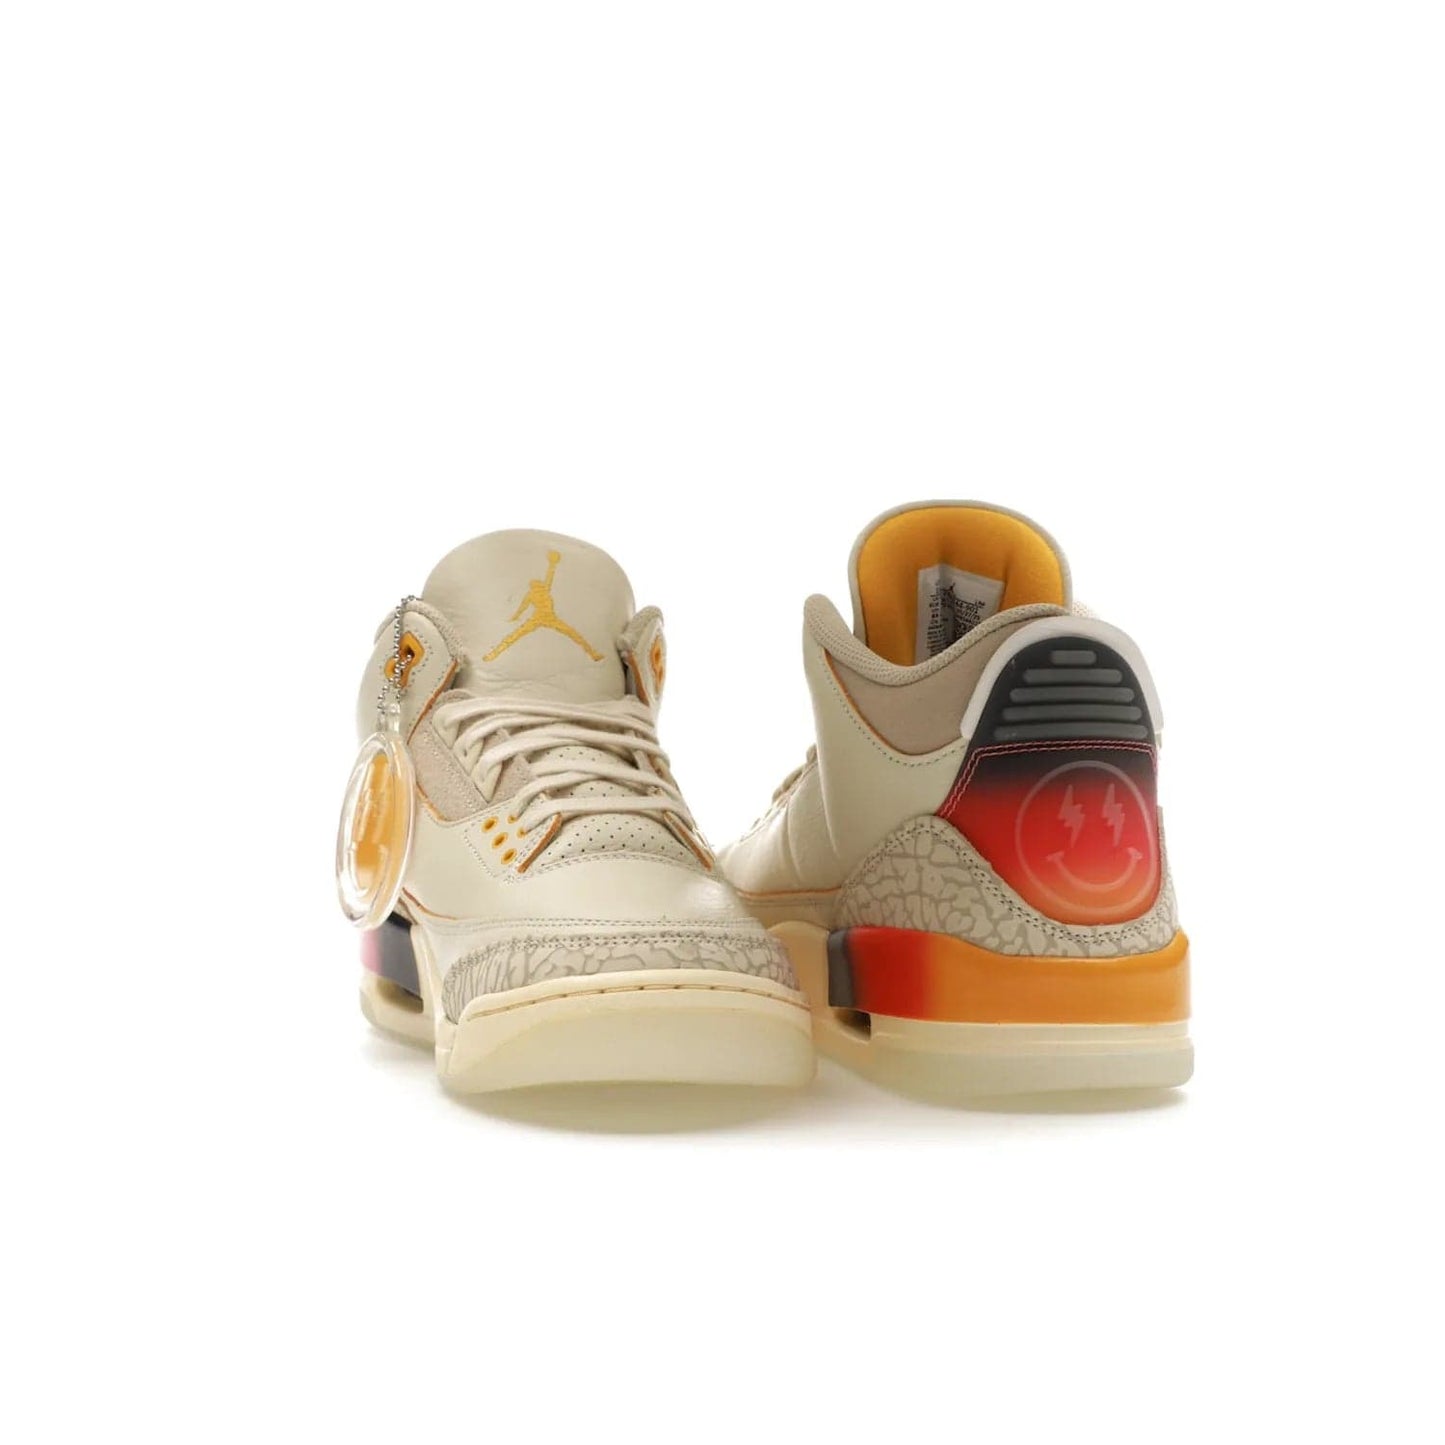 Jordan 3 Retro SP J Balvin Medellín Sunset - Image 26 - Only at www.BallersClubKickz.com - J Balvin x Jordan 3 Retro SP: Celebrate the joy of life with a colorful, homage to the electrifying reggaeton culture and iconic Jordan 3. Limited edition, Sept. 23. $250.